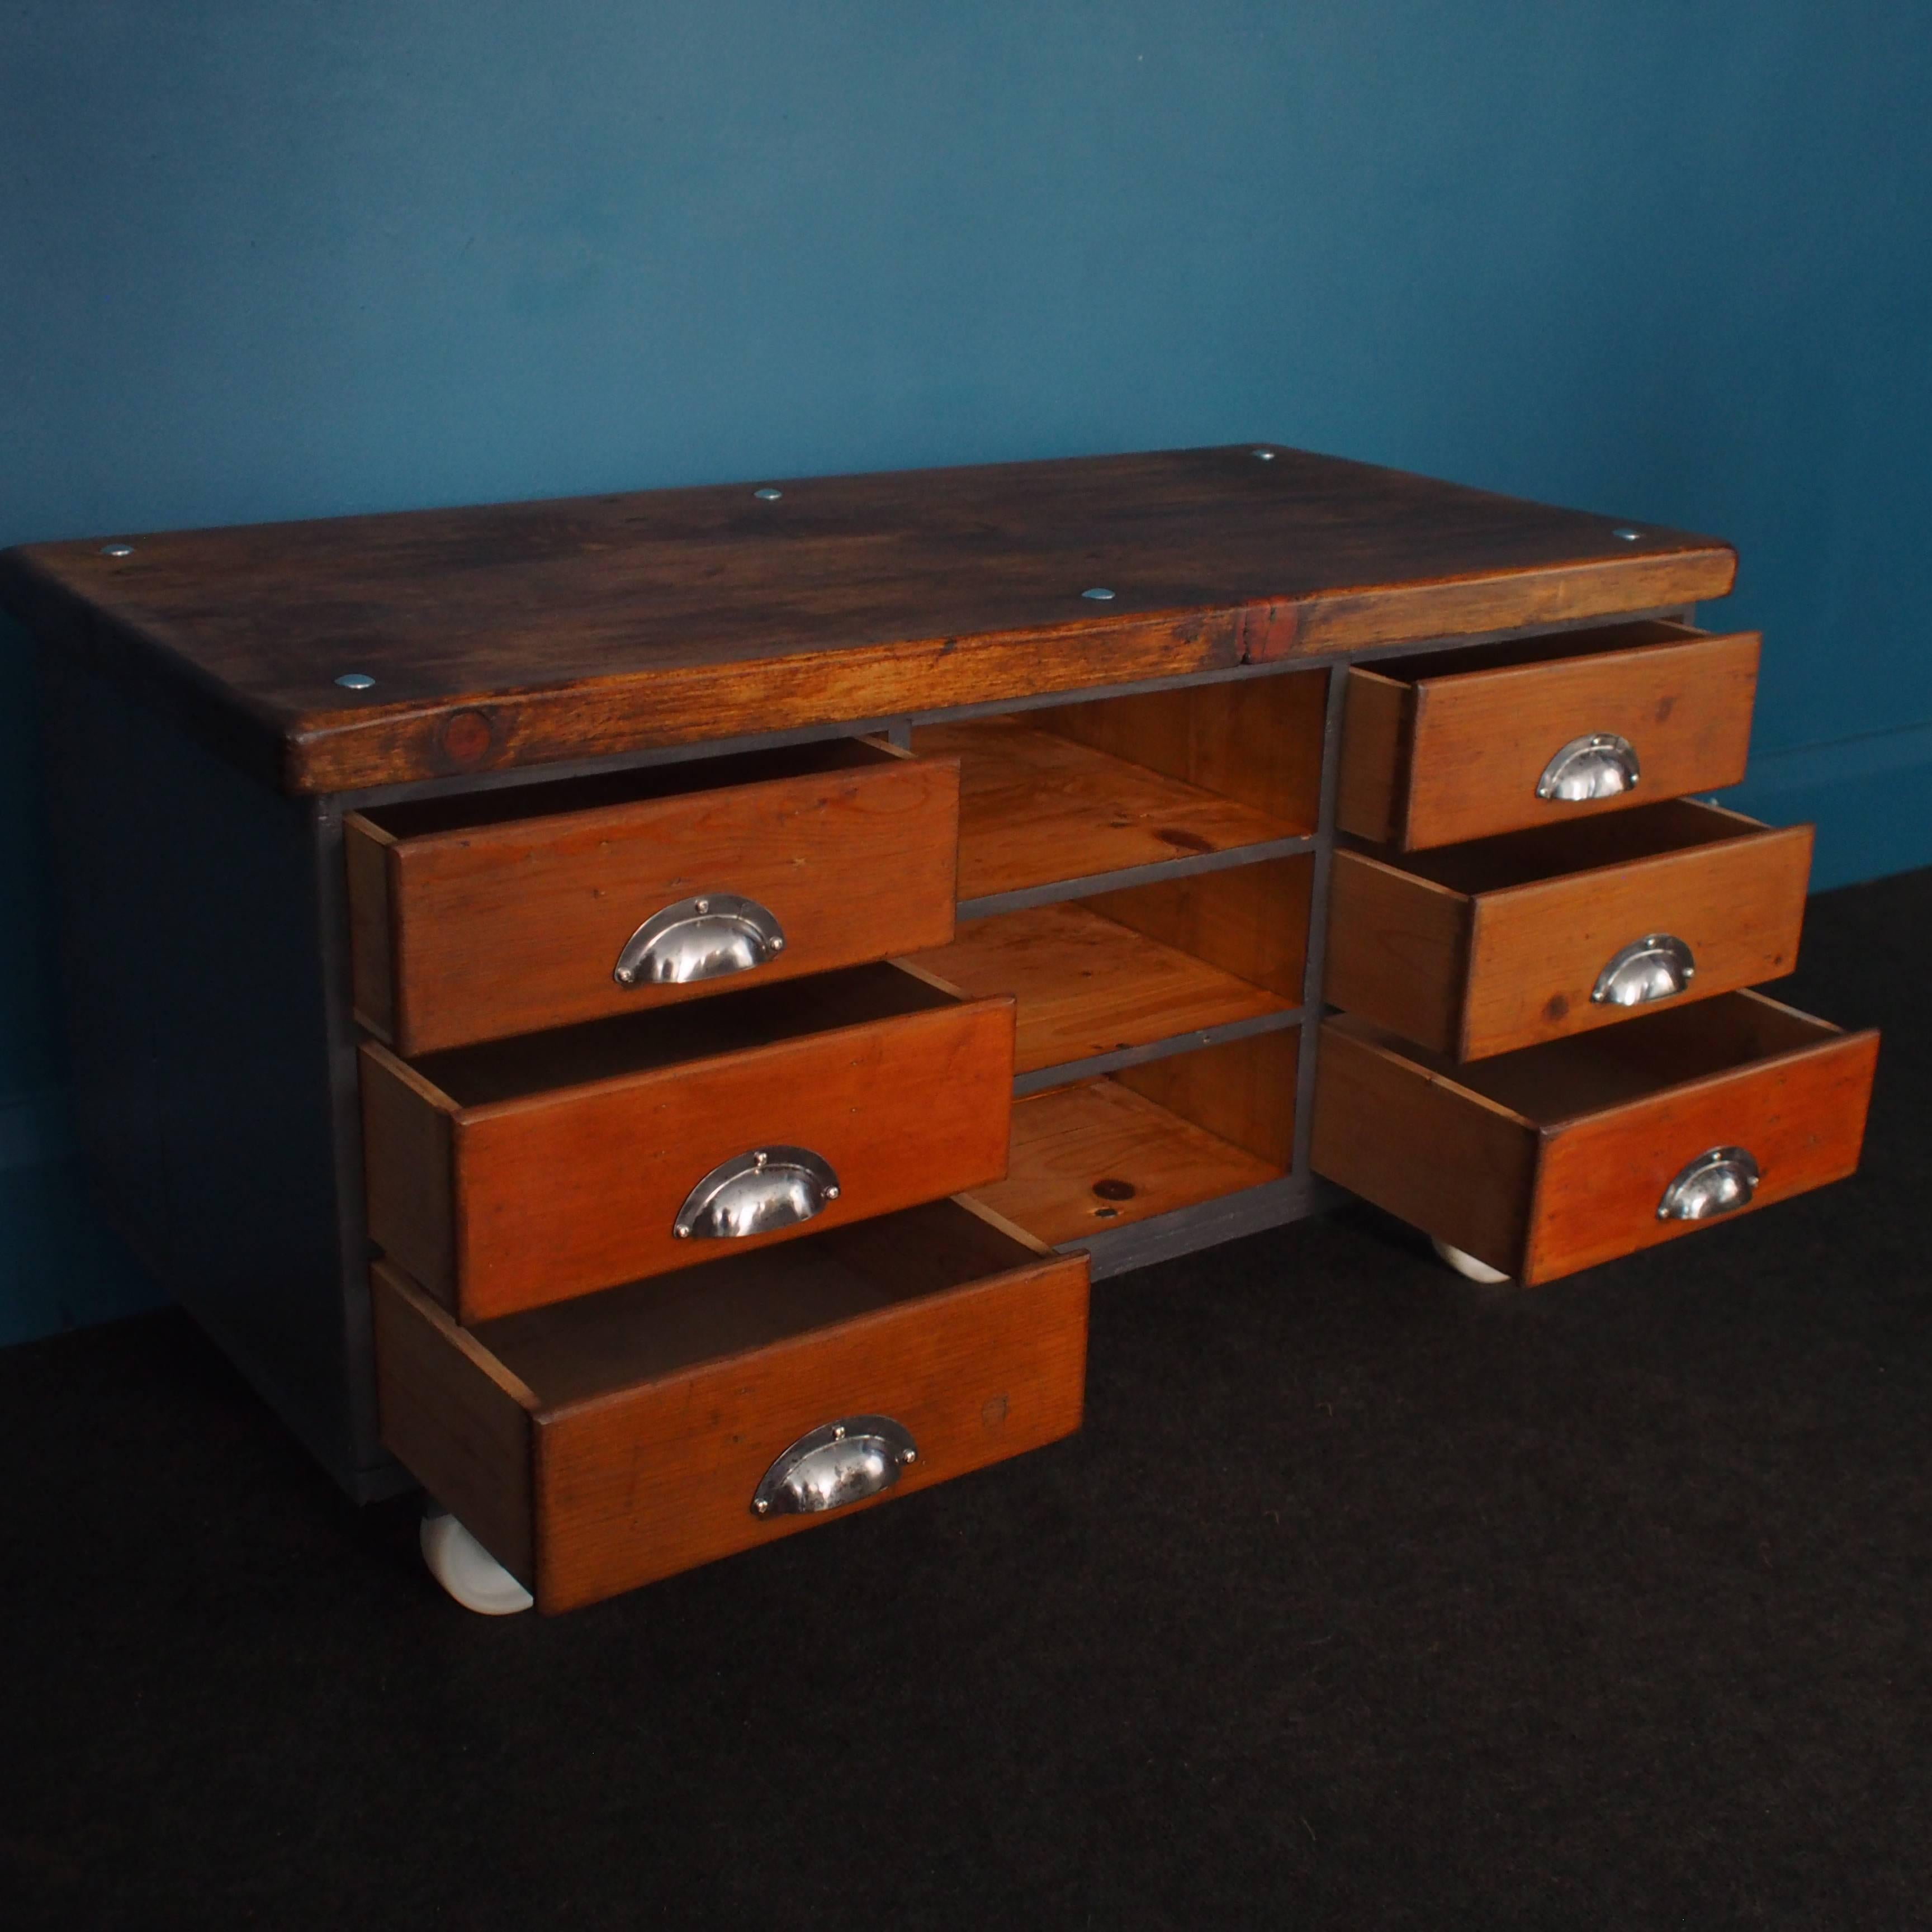 Topped with deep sections of reclaimed timber planks and set on heavy-duty casters, this extremely handsome vintage piece has six dovetail-jointed drawers, each fitted with a steel cup handle and three open shelves, providing ample and versatile